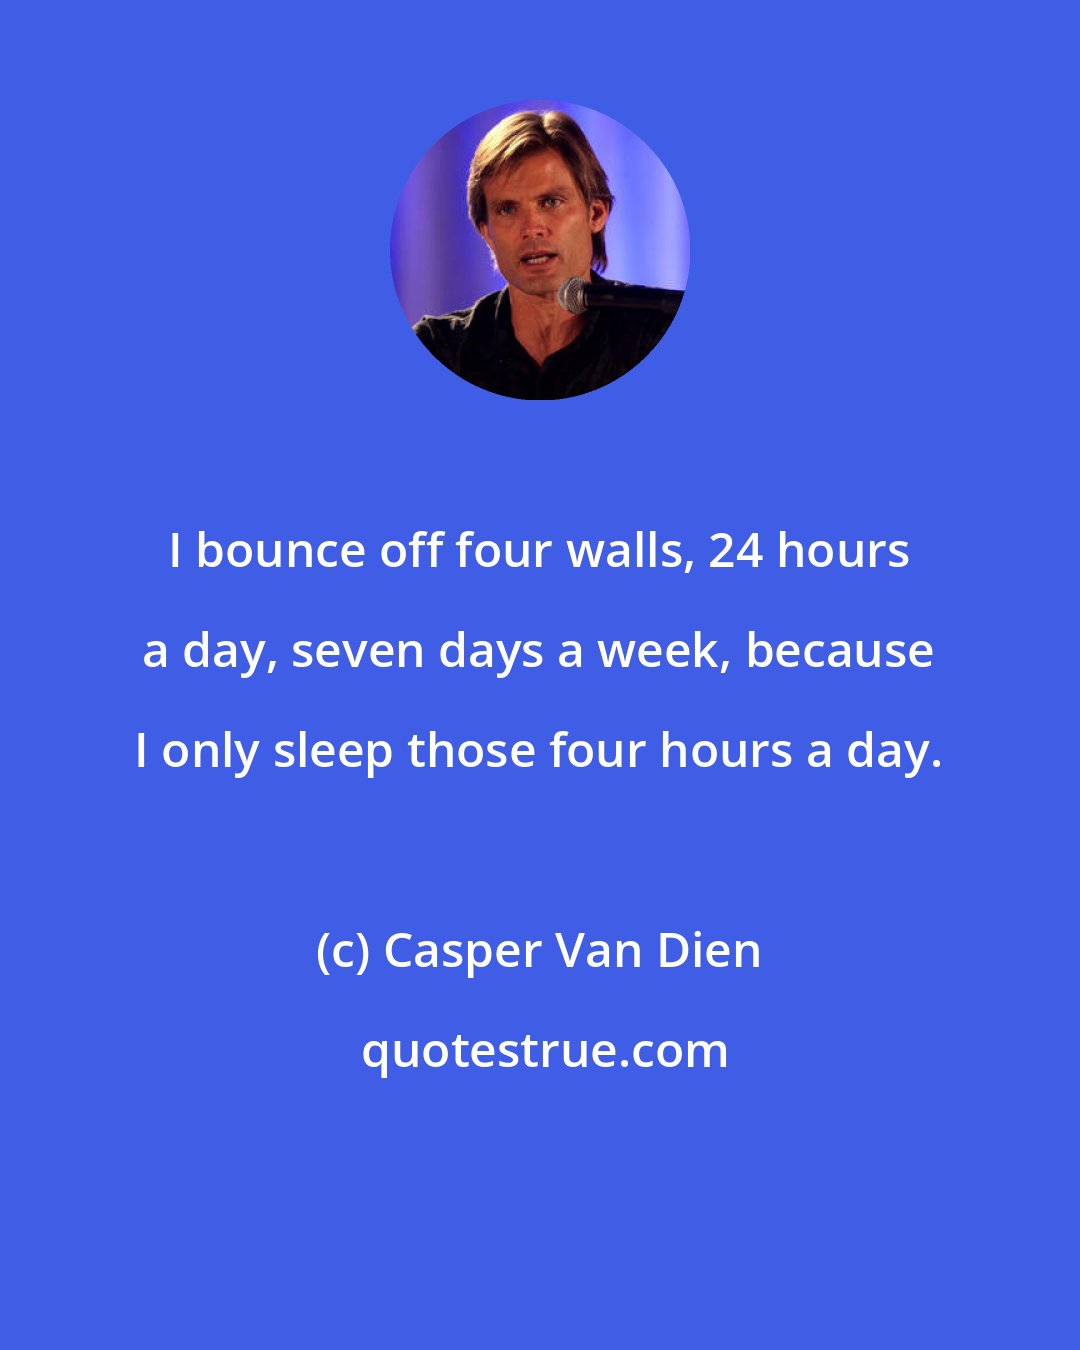 Casper Van Dien: I bounce off four walls, 24 hours a day, seven days a week, because I only sleep those four hours a day.